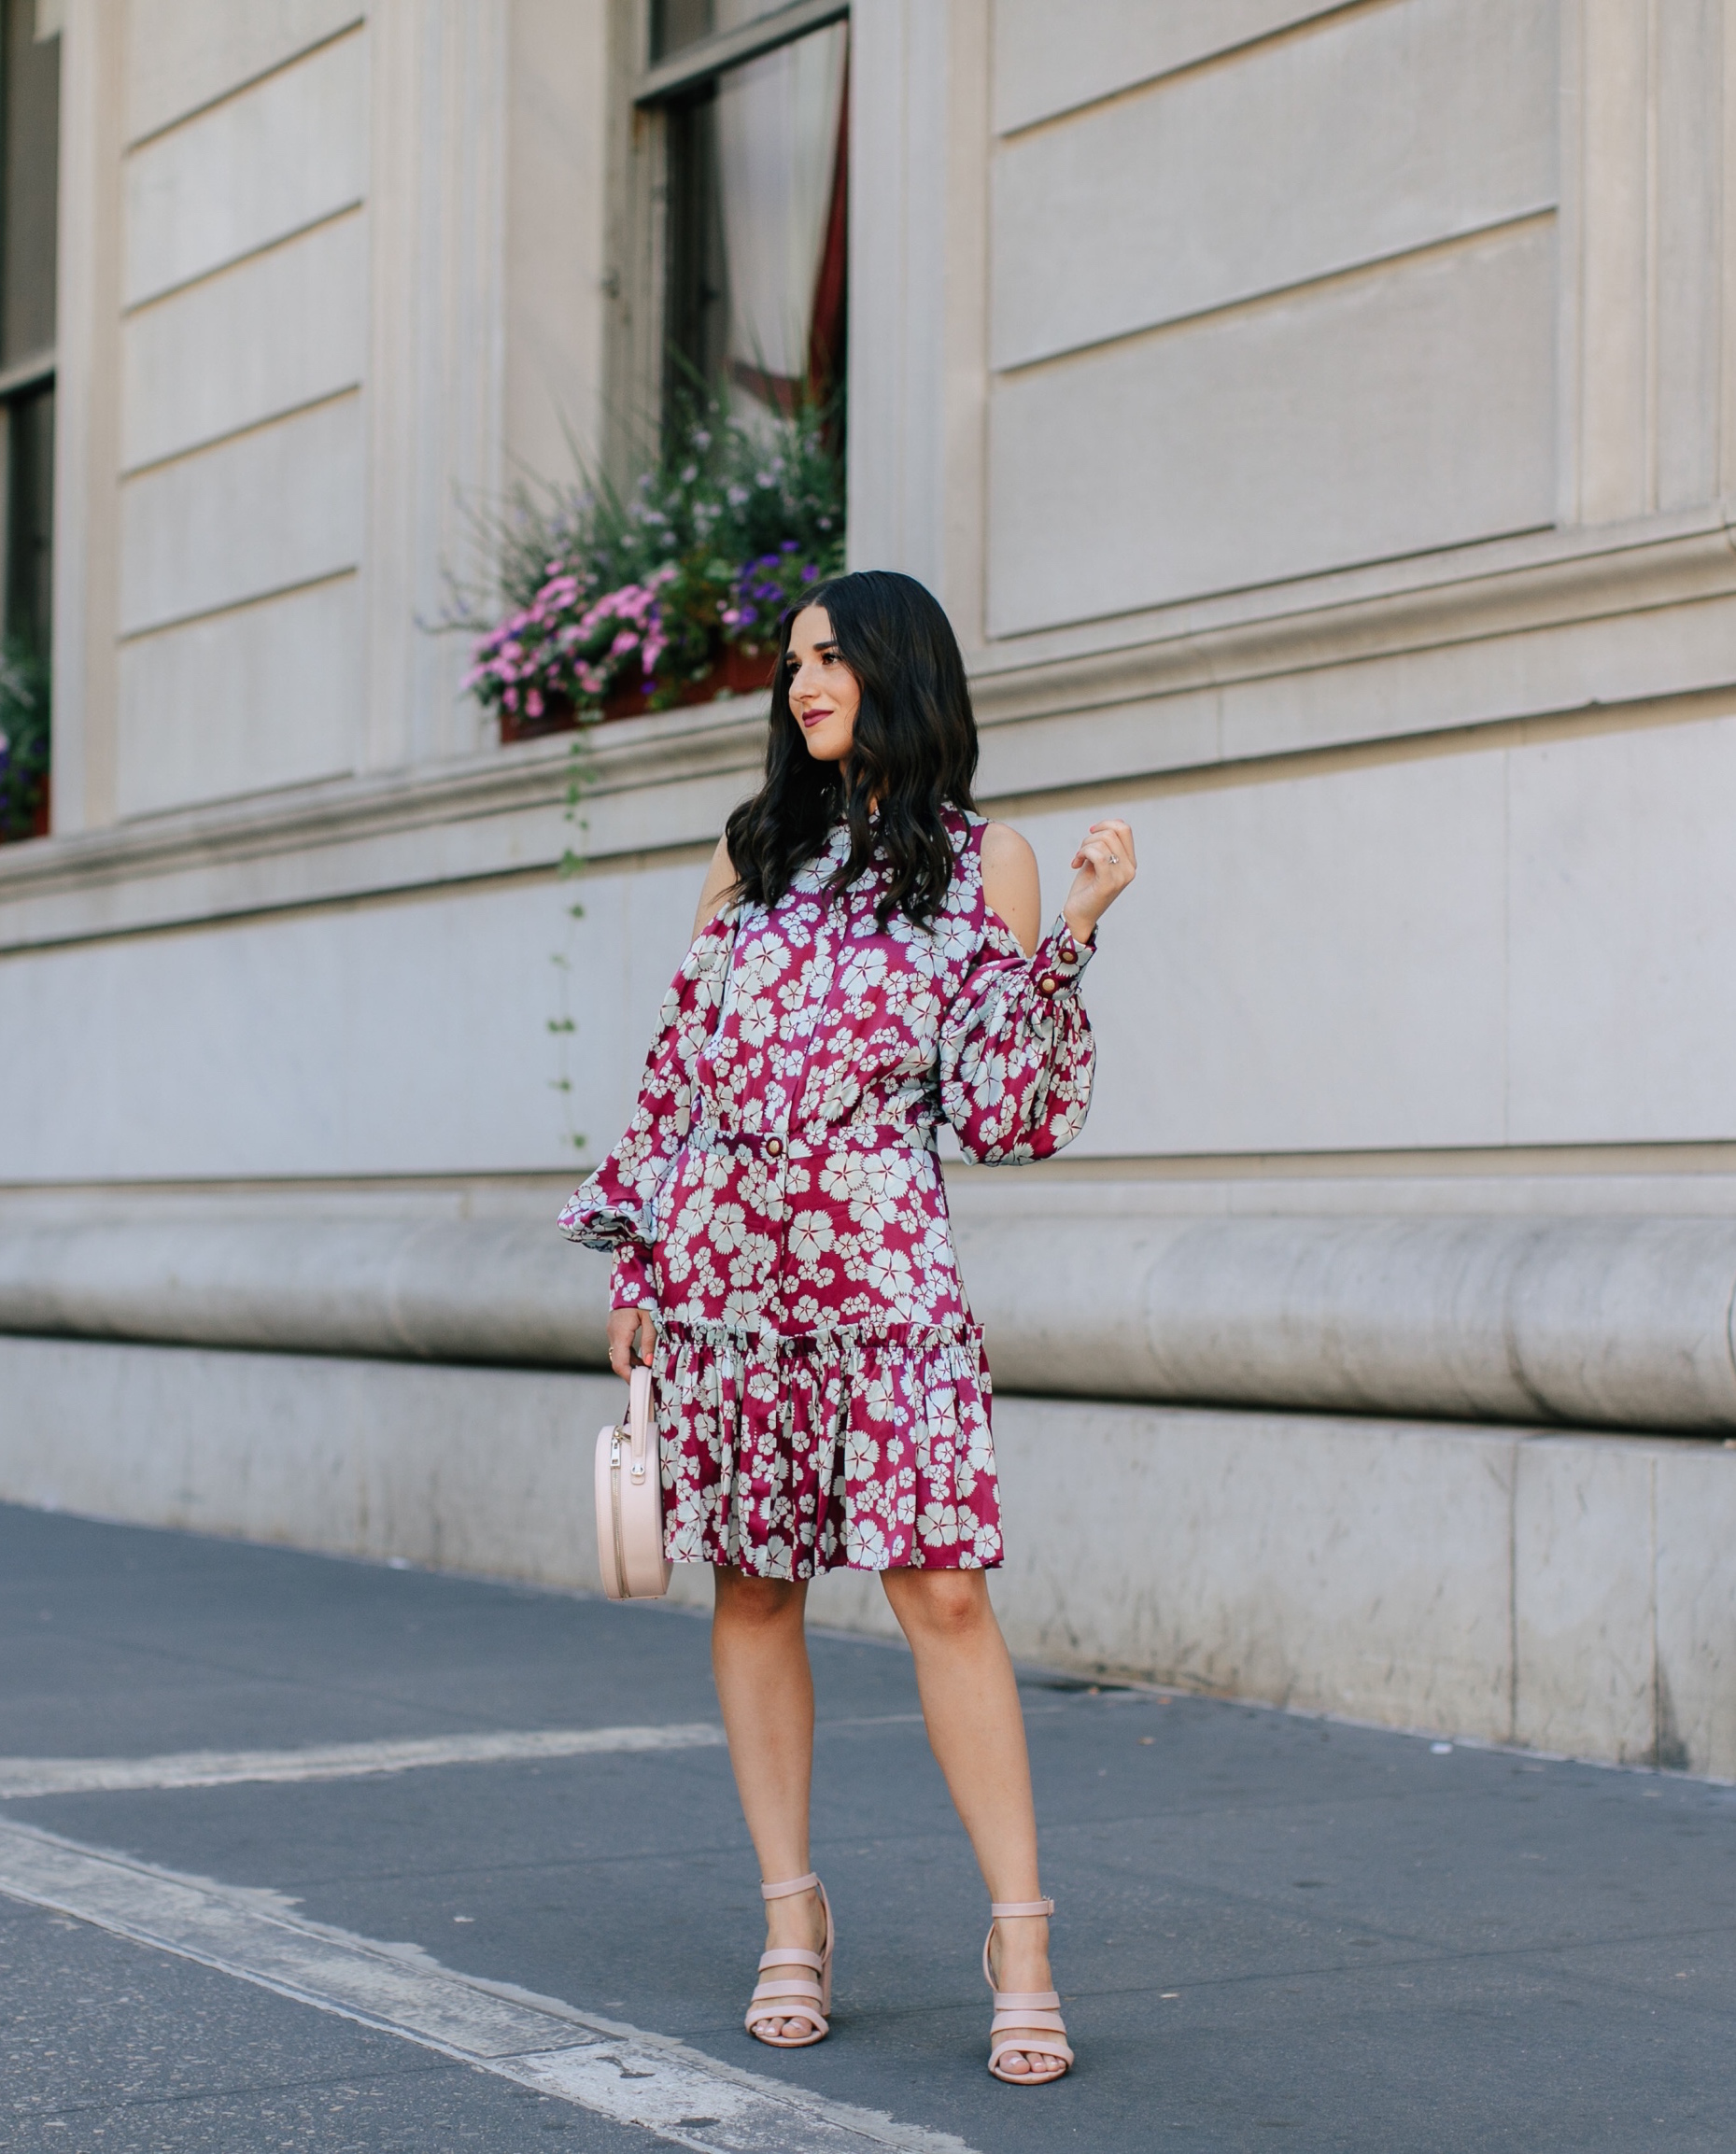 A Blogger’s Guide To Turning Your S.O. Into Your Photographer Cold Shoulder Floral Dress Esther Santer Fashion Blog NYC Street Style Blogger Outfit OOTD Trendy Designer Nordstrom Strappy Blush Pink Heels Circle  Bag Shopping Wavy Hair Diamond Jewelry.jpg